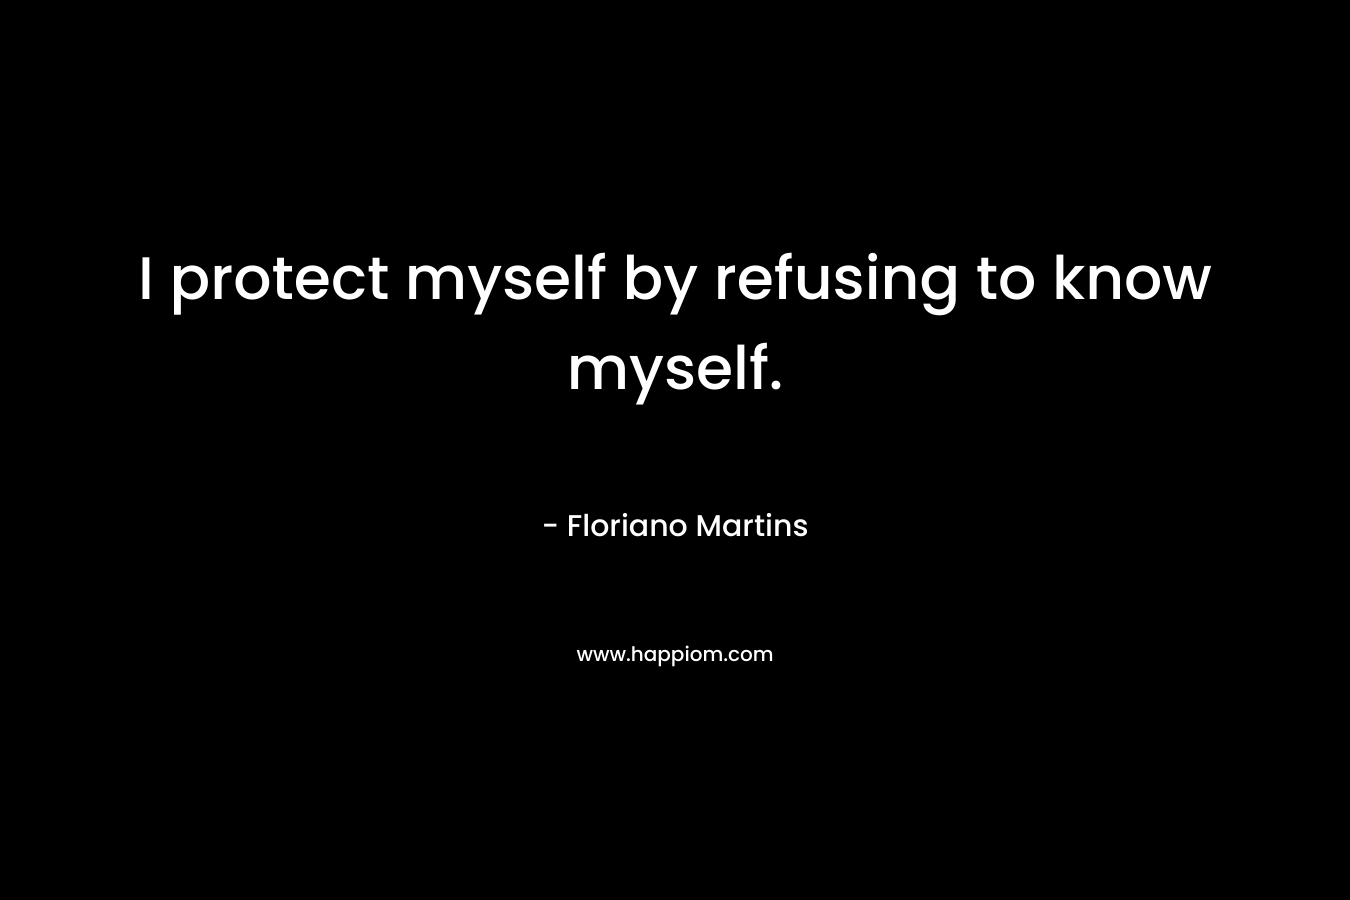 I protect myself by refusing to know myself.